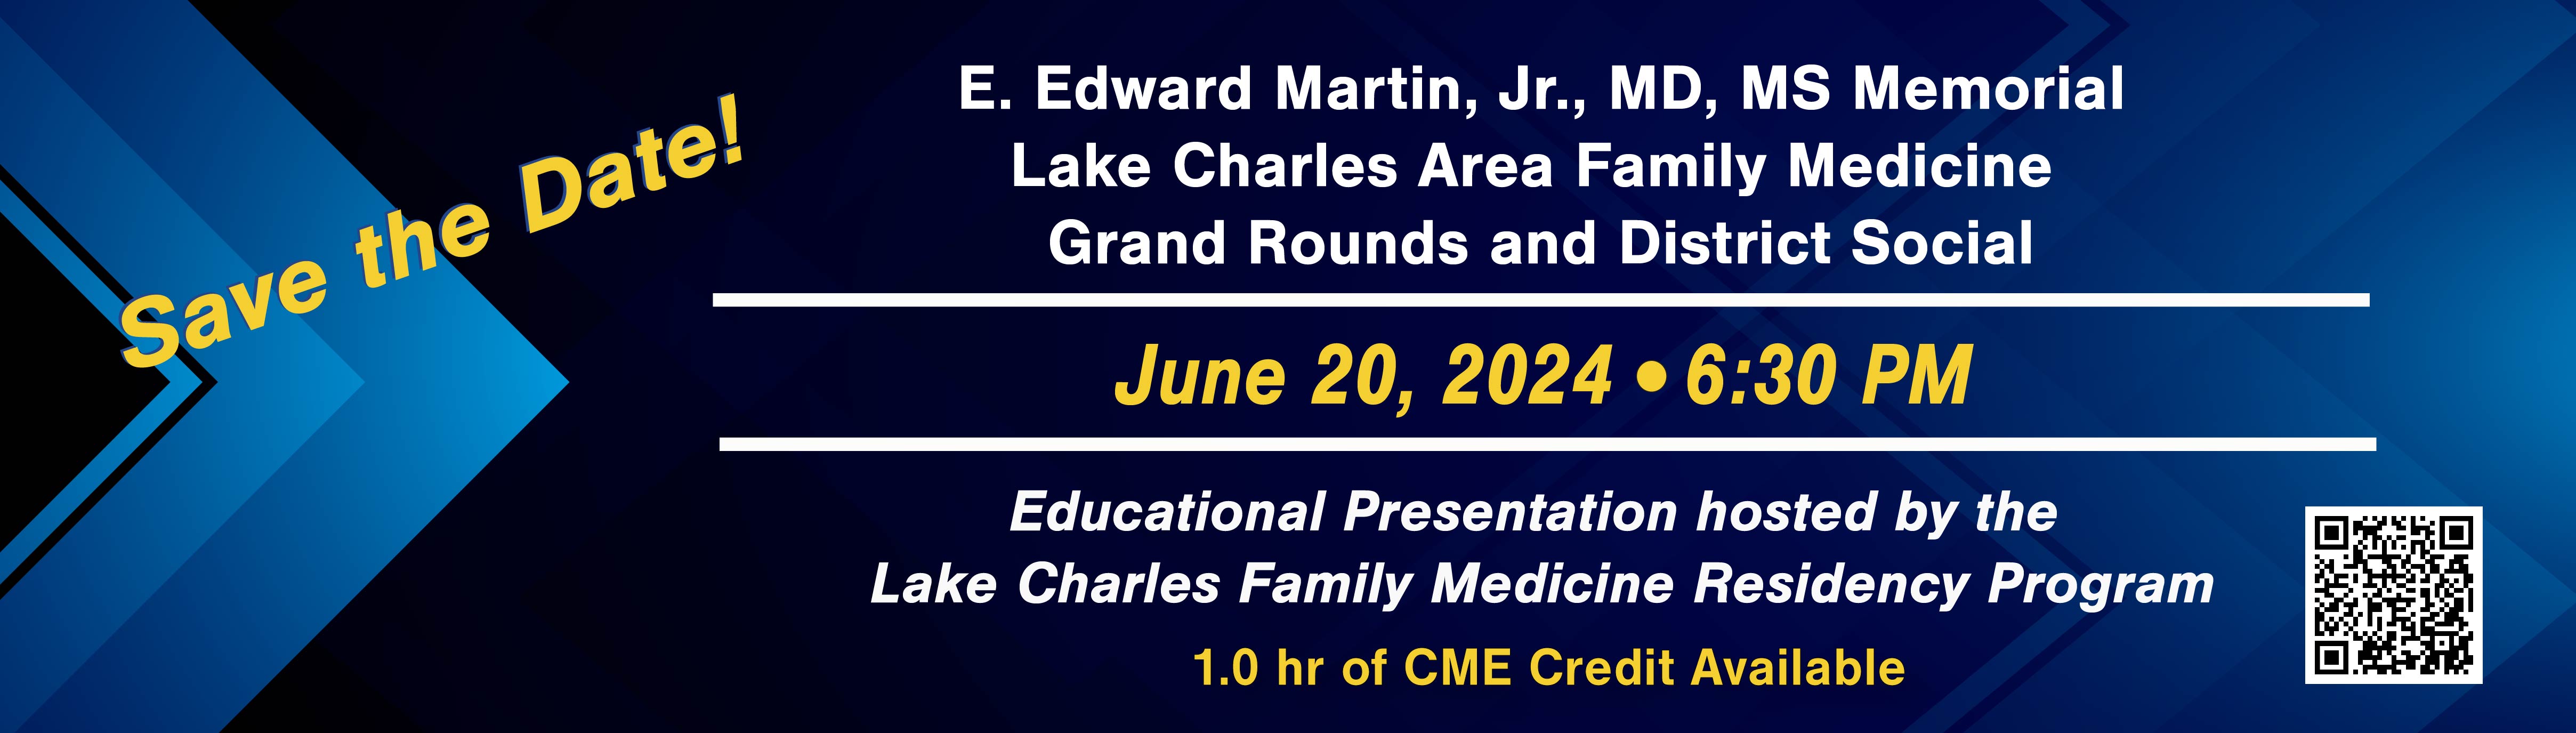 Grand Rounds web banner Save the Date 01